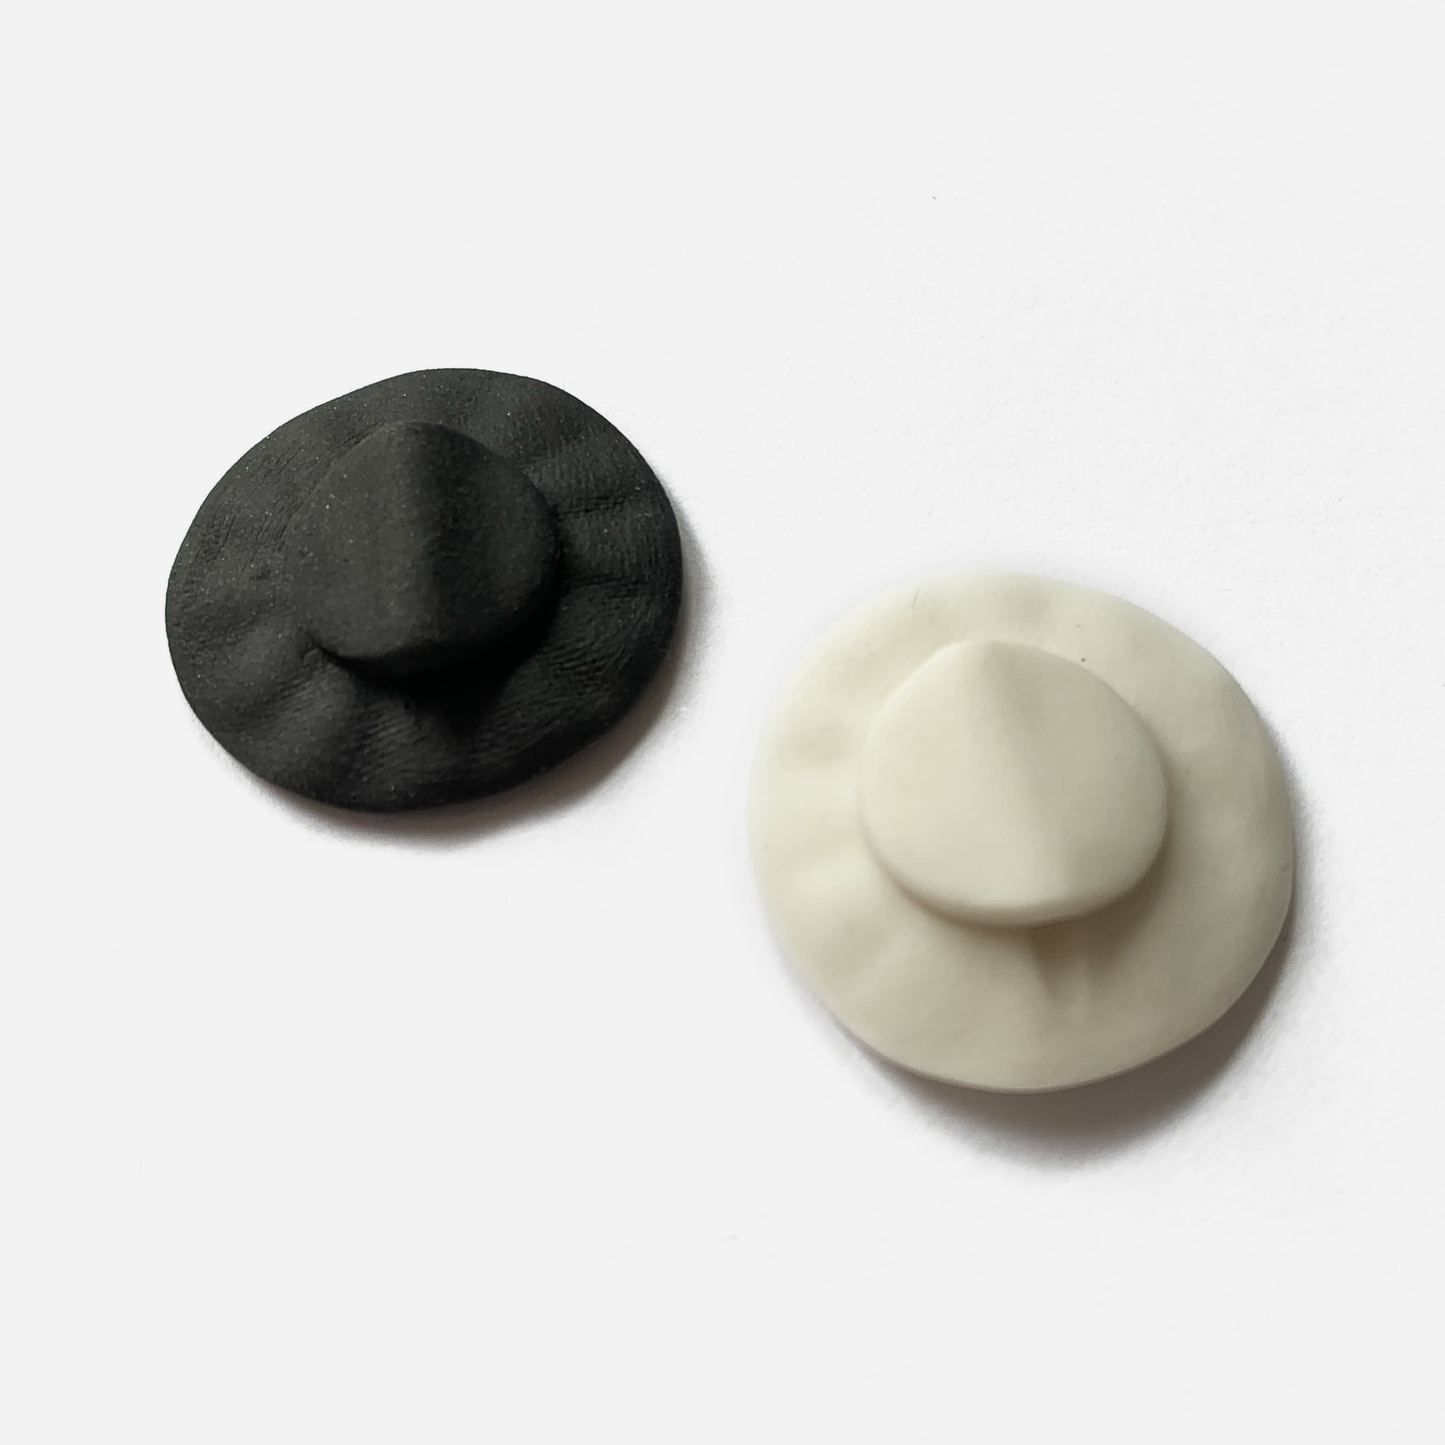 Ivory & Silver - Porcelain Bling Buttons